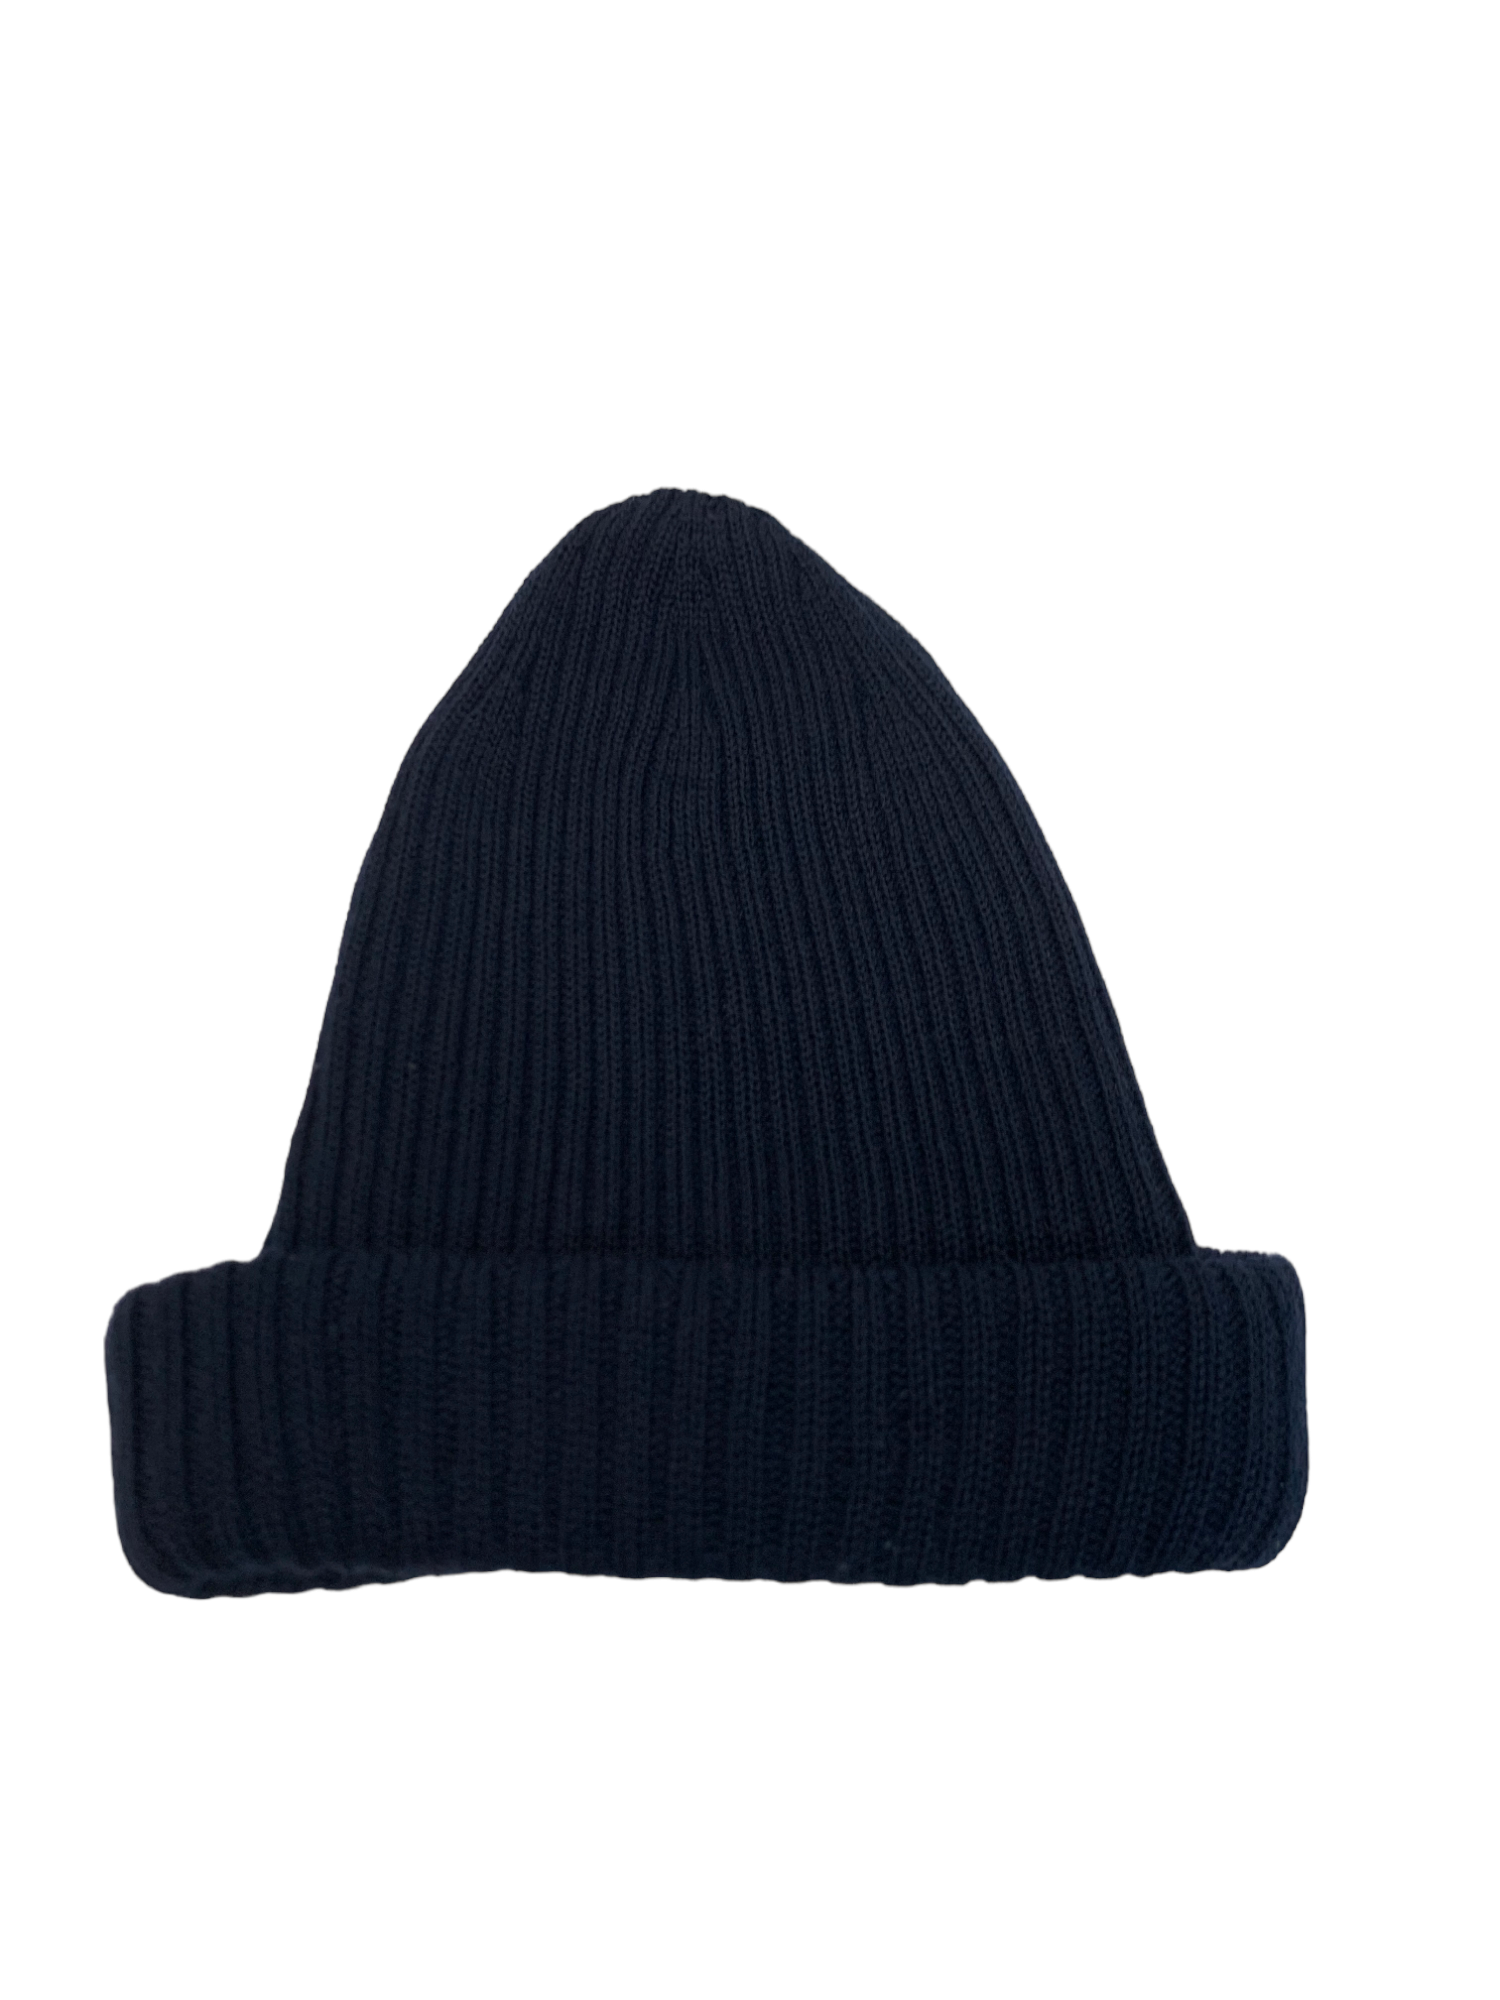 BMING LIFE STORE BEAMS MADE IN JAPAN UNISEX BEANIE HAT CAP - 7